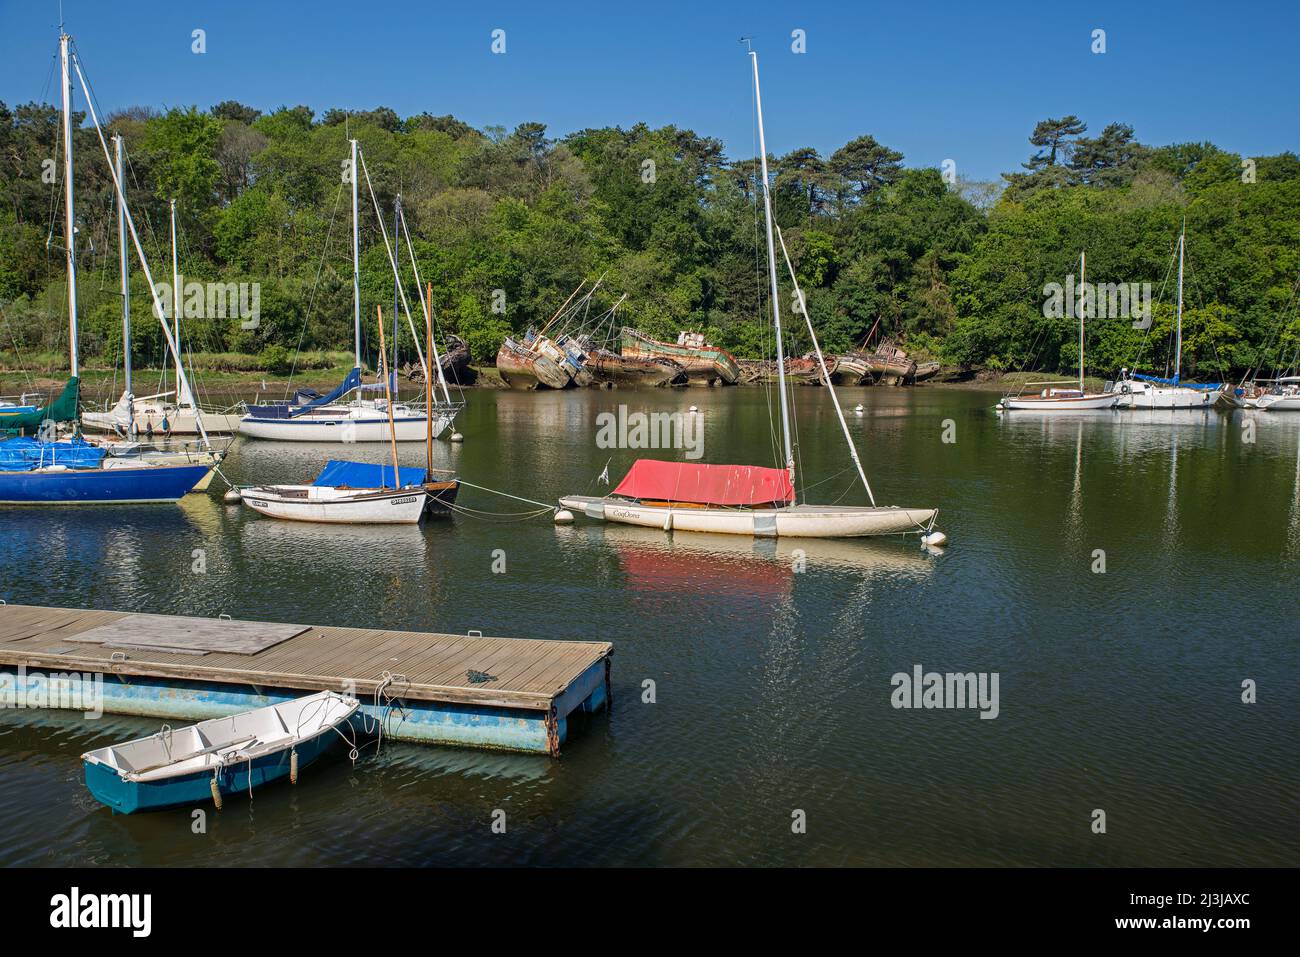 Douarnenez, sailboats and shipwrecks in the historic port of Port-Rhu, France, Brittany, Finistère department. Stock Photo